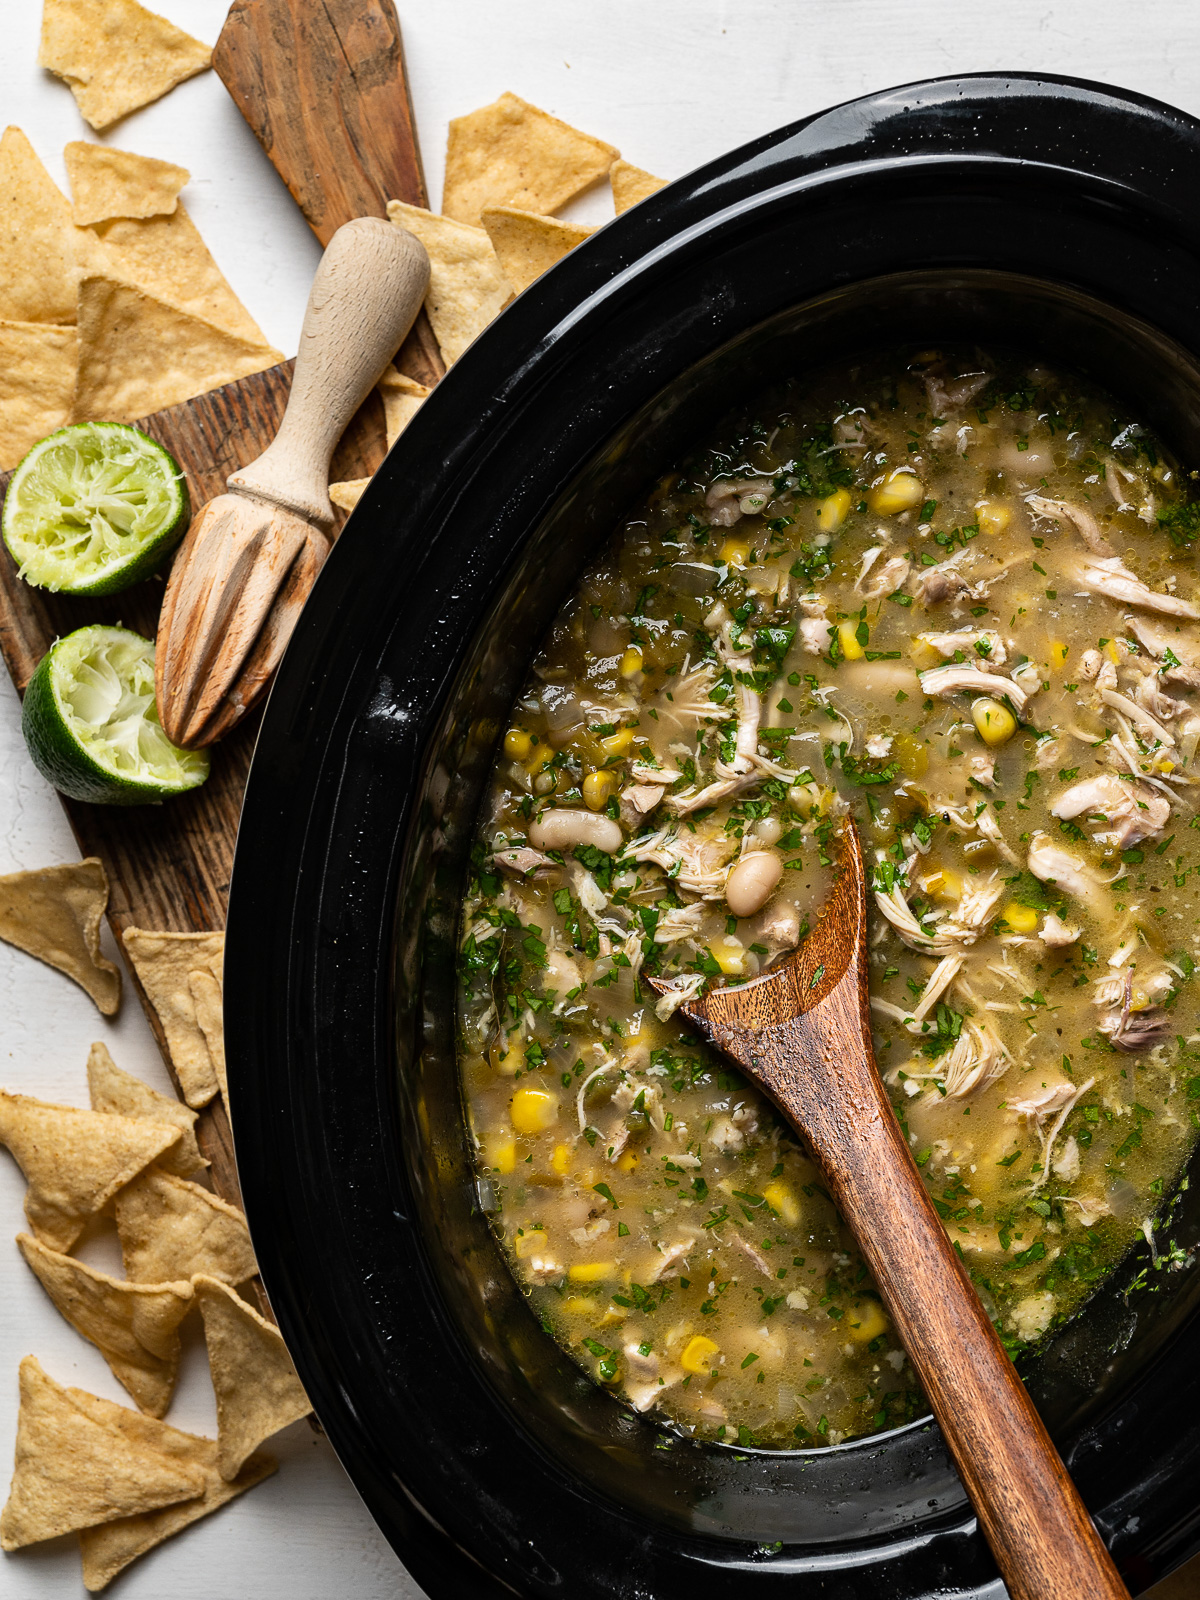 white chicken chili in slow cooker with squeezed lime wedges and tortillas scattered around